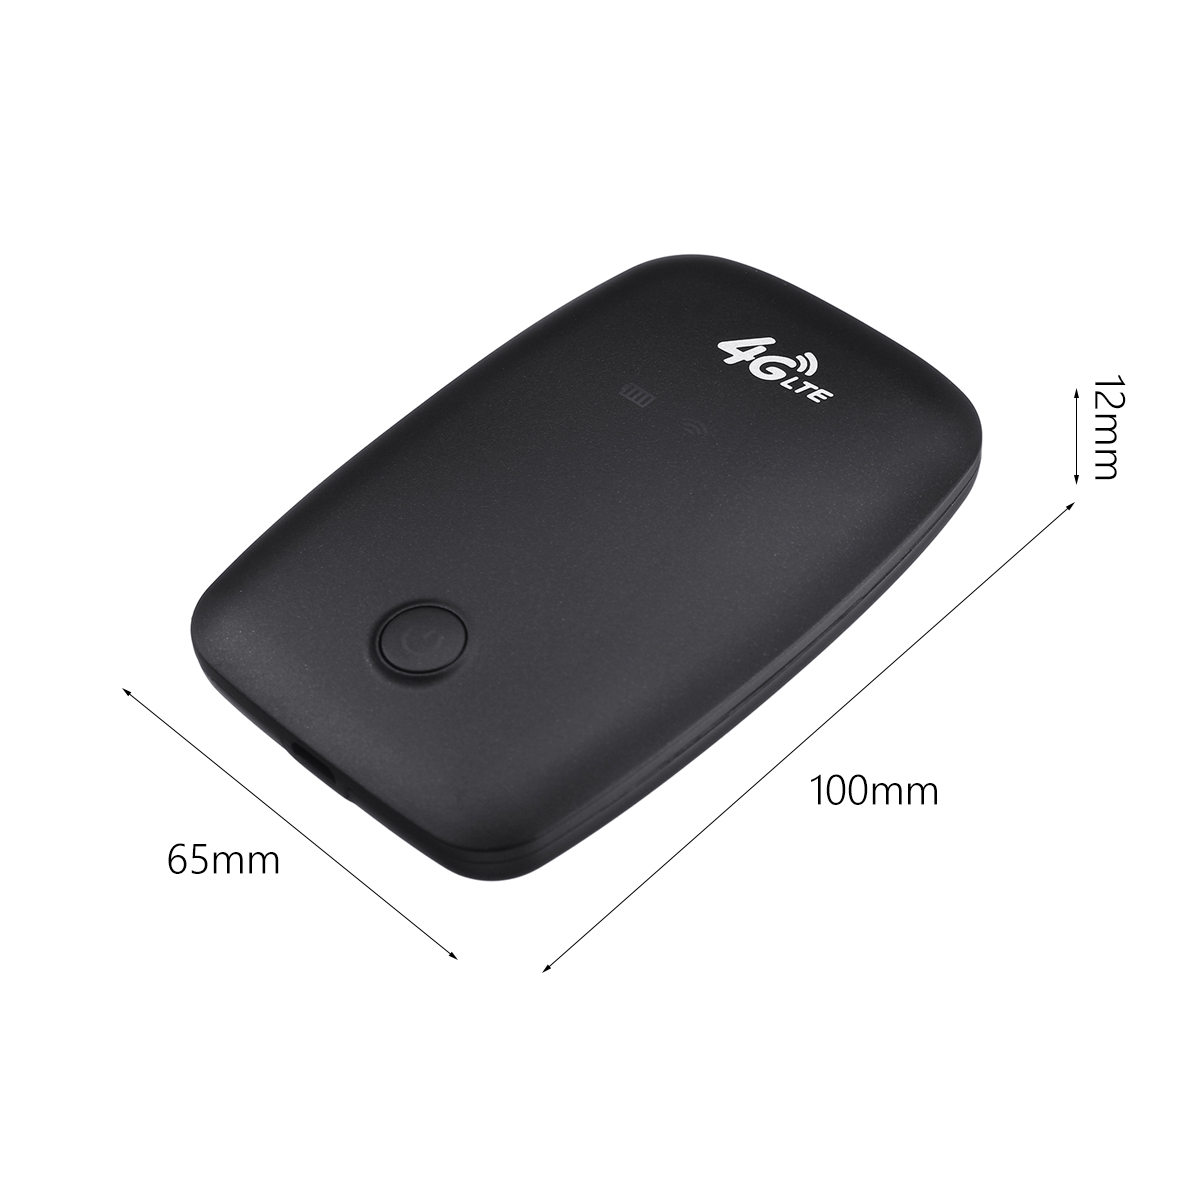 3Mode 4G 3G 2G WiFi Wireless Portable Pocket Router Support 32G TF Card Suitable for PC Mobile 17